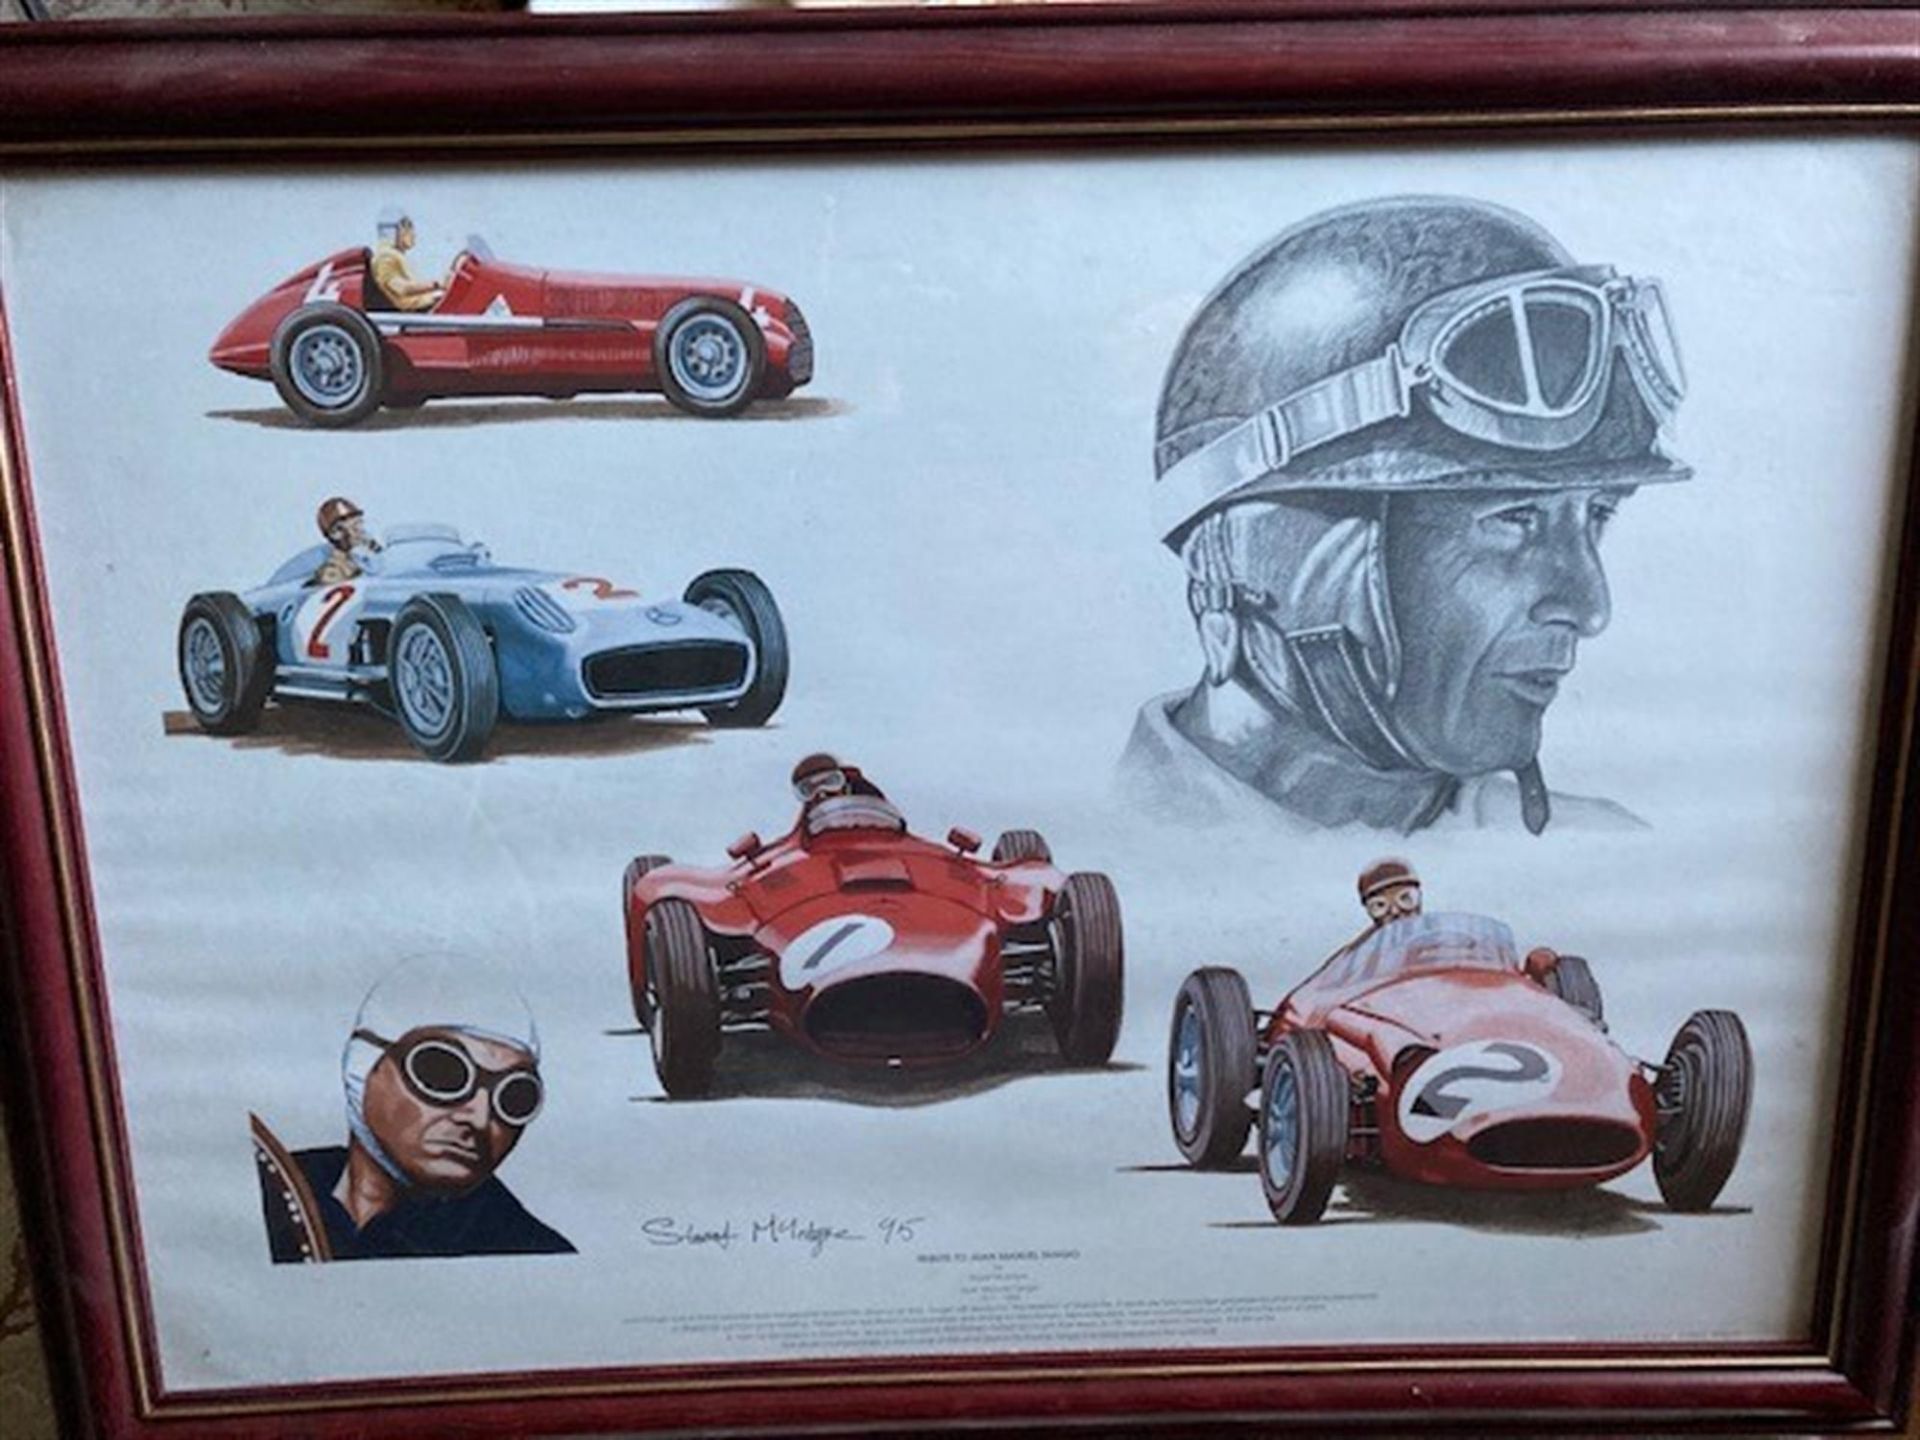 Tribute to Juan Manuel Fangio by Stuart McIntyre - Image 2 of 3